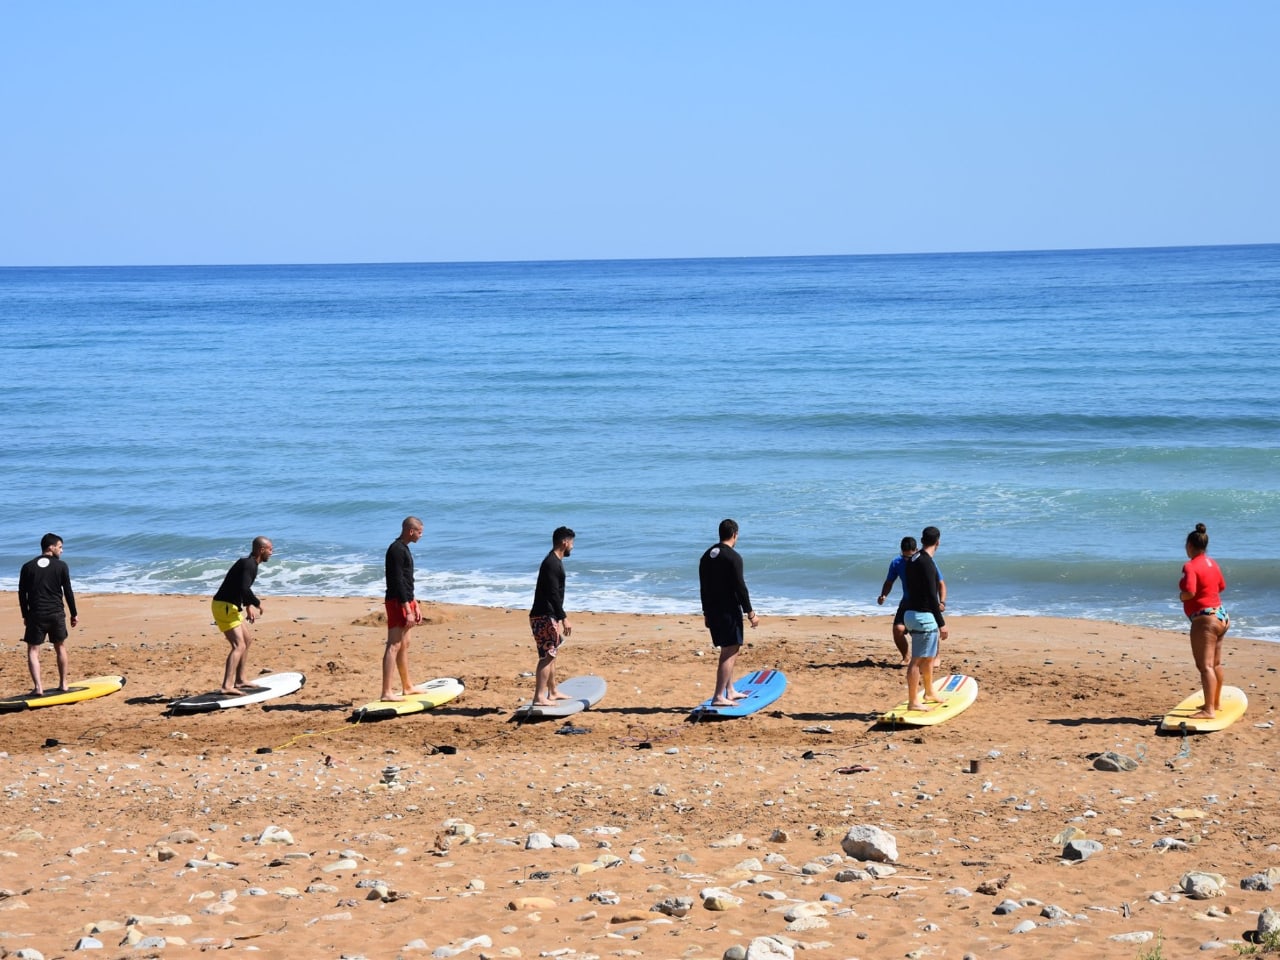 surf lessons chania crete, surfing lessons chania crete, sup lessons chania crete, best surfing club chania, where to surf chania crete, where to sup chania crete, best surf instructor chania crete